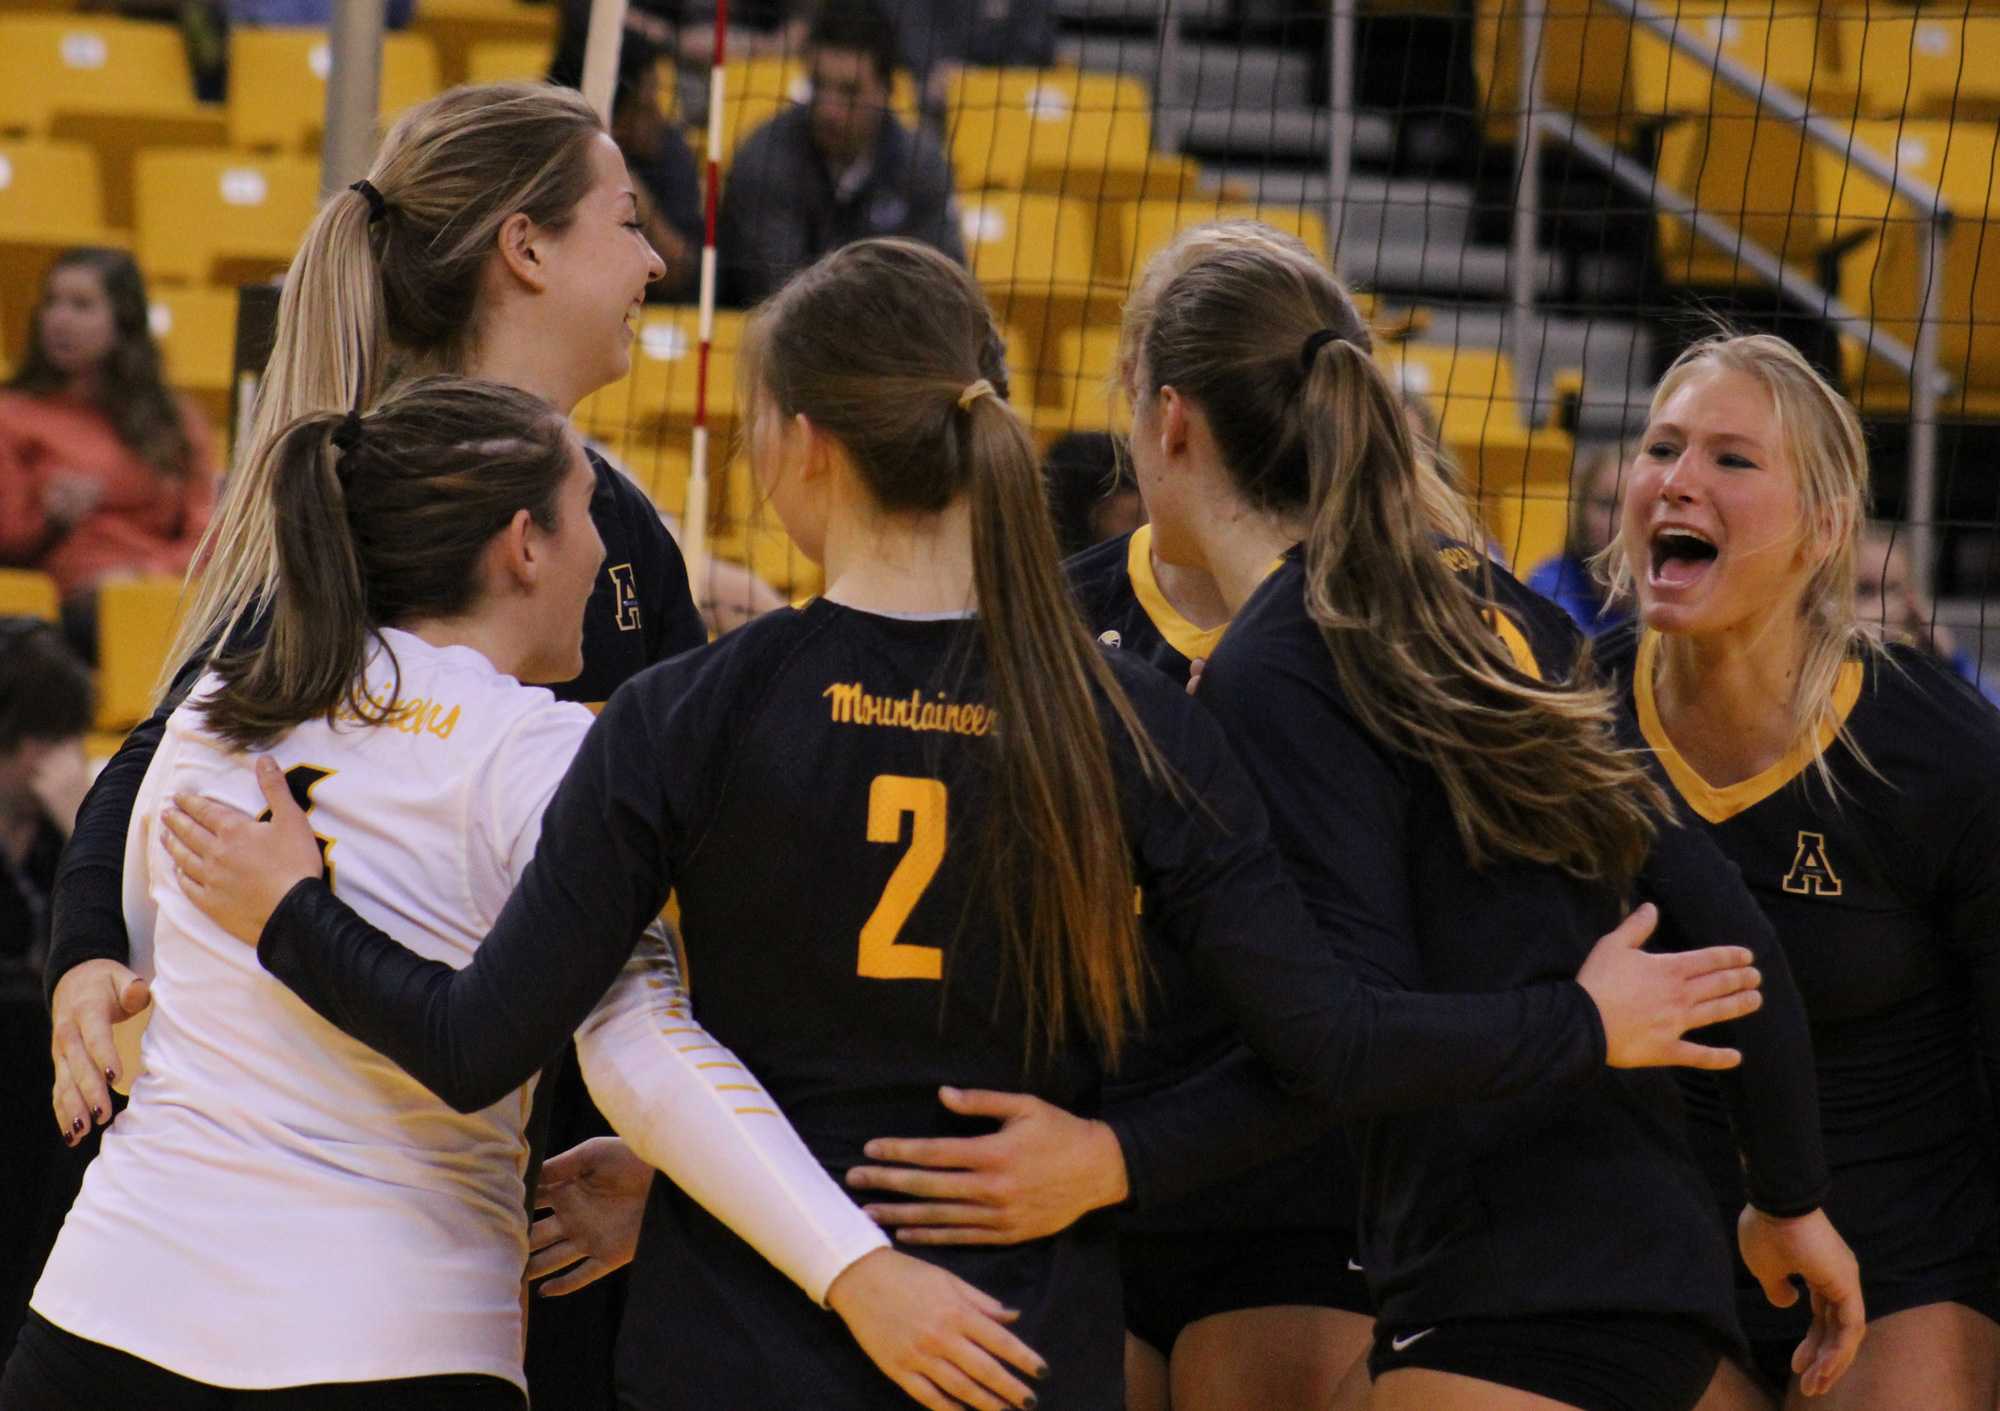 App State volleyball celebrate after winning a set during Friday's match against Georgia State.
Photo credit: Emory Kumpe, Photographer